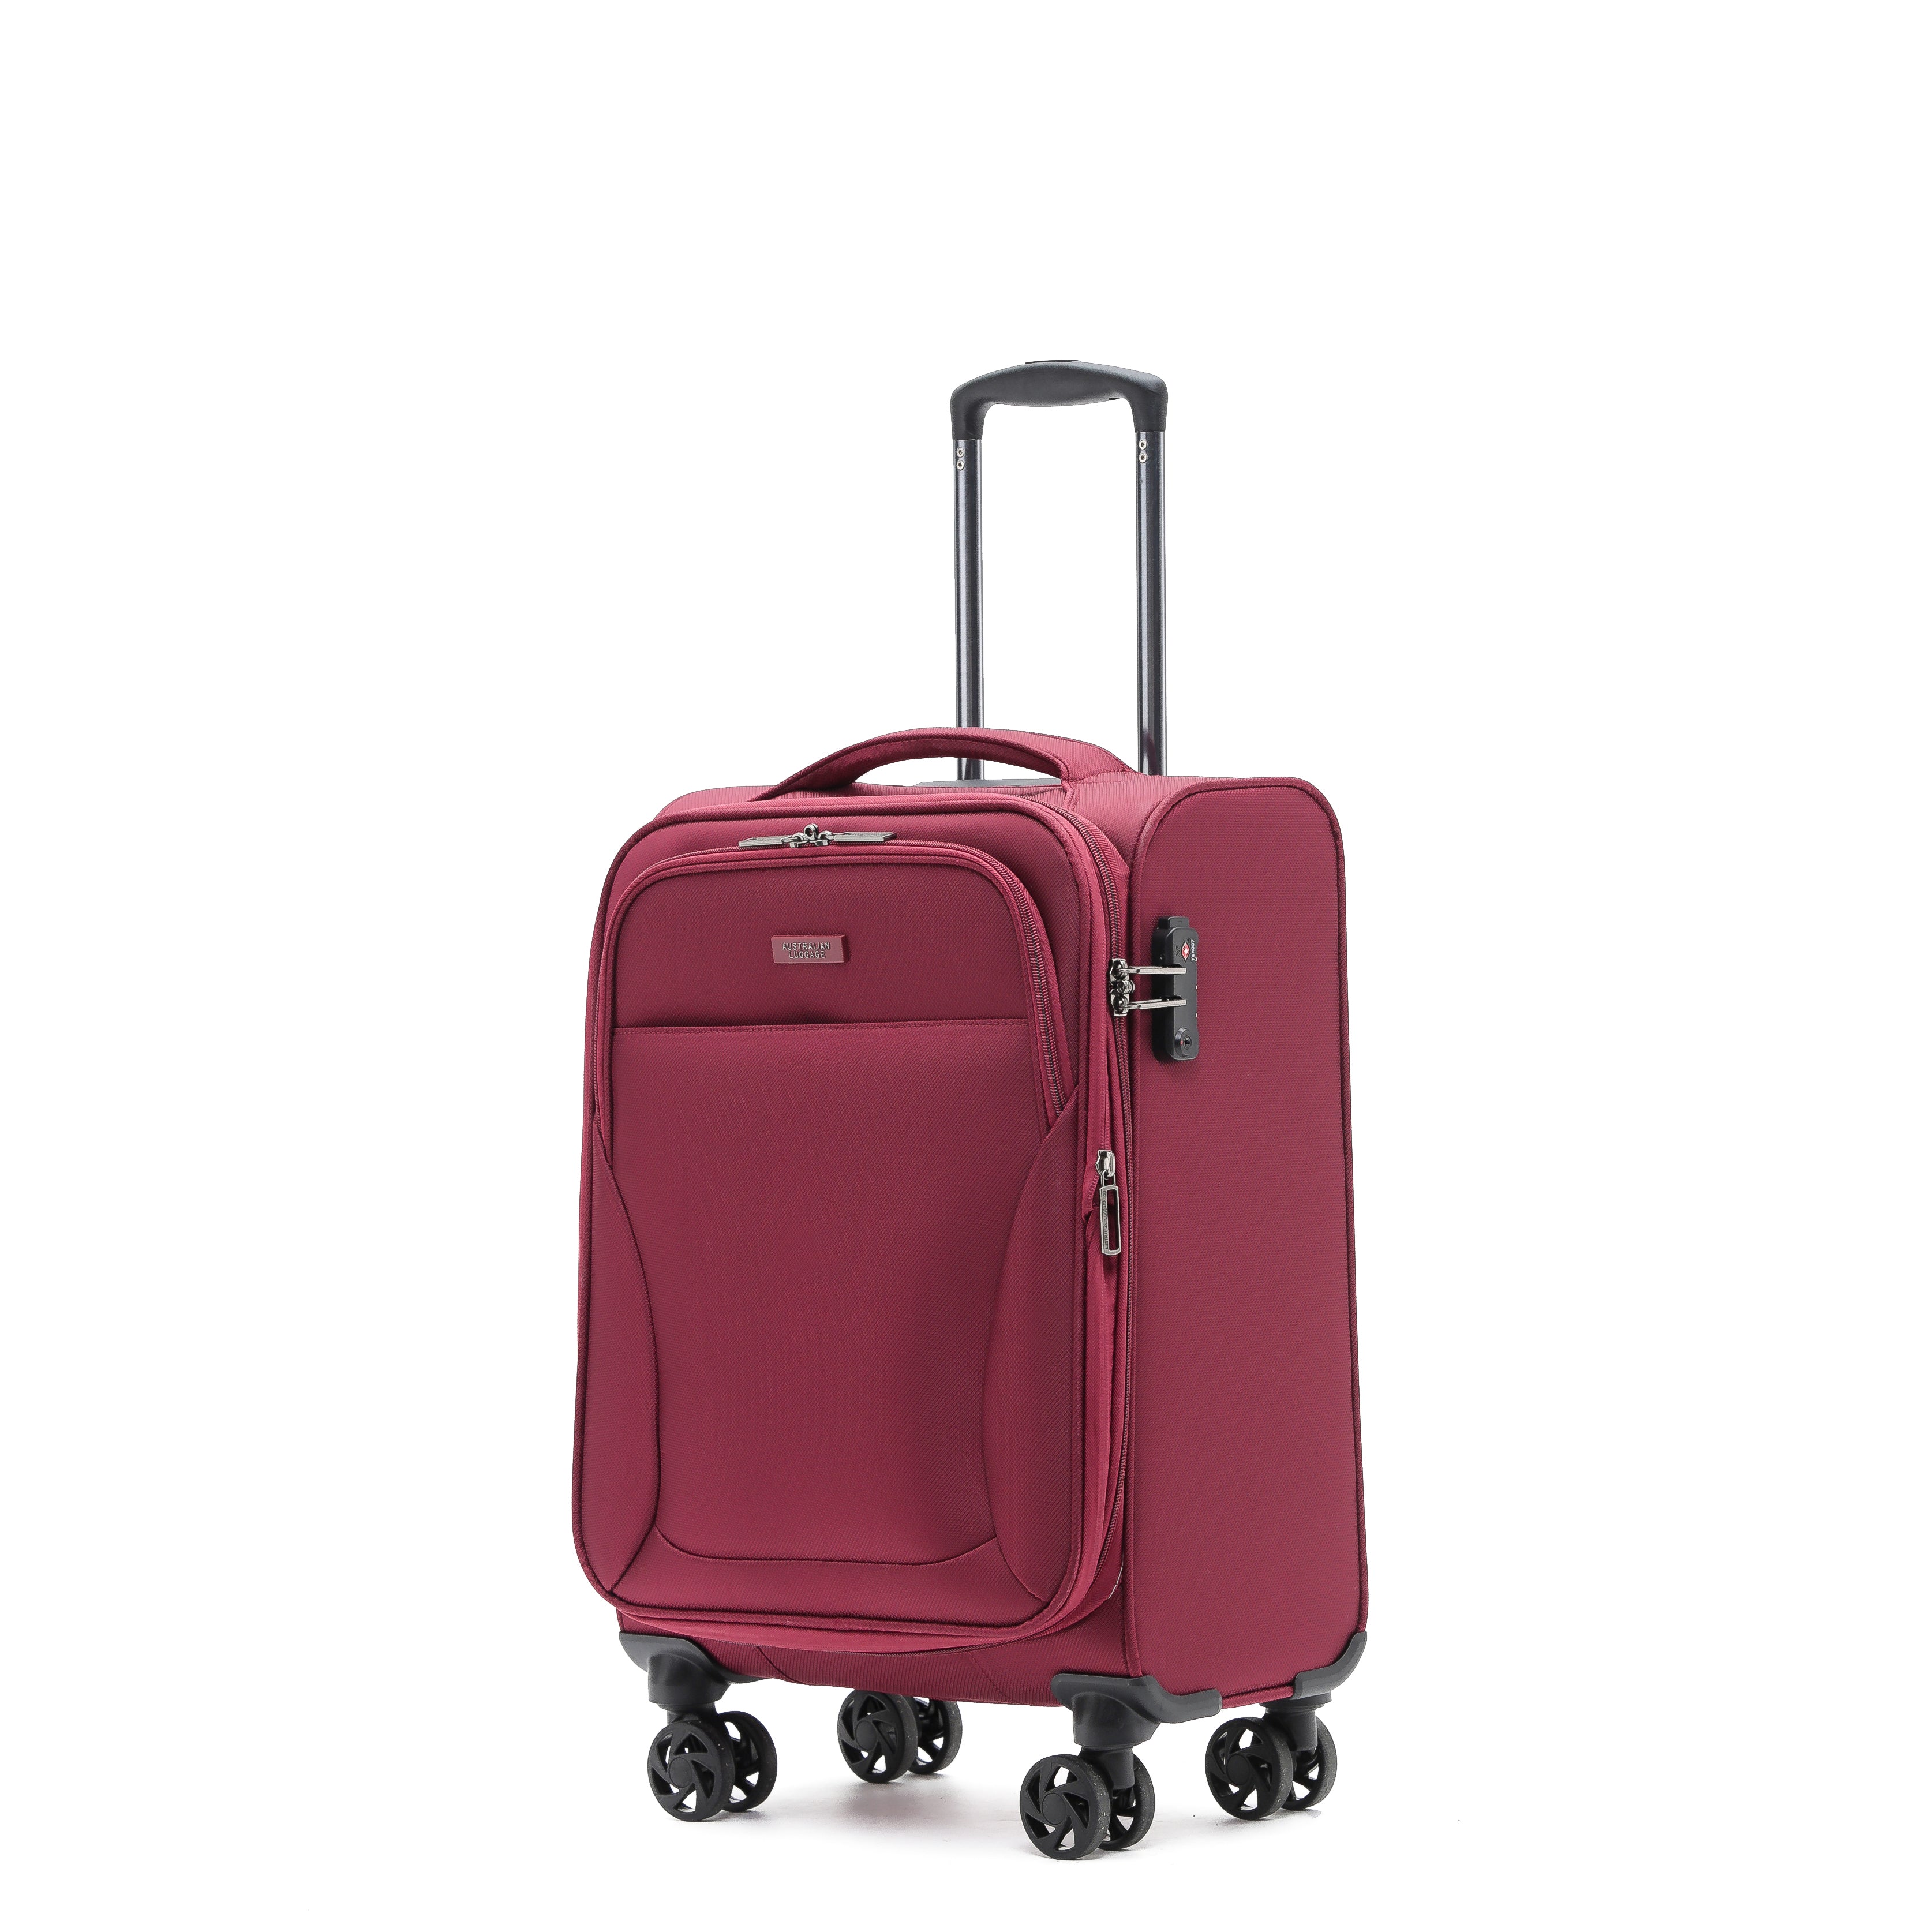 Aus Luggage - WINGS Set of 3 Suitcases - Wine-6